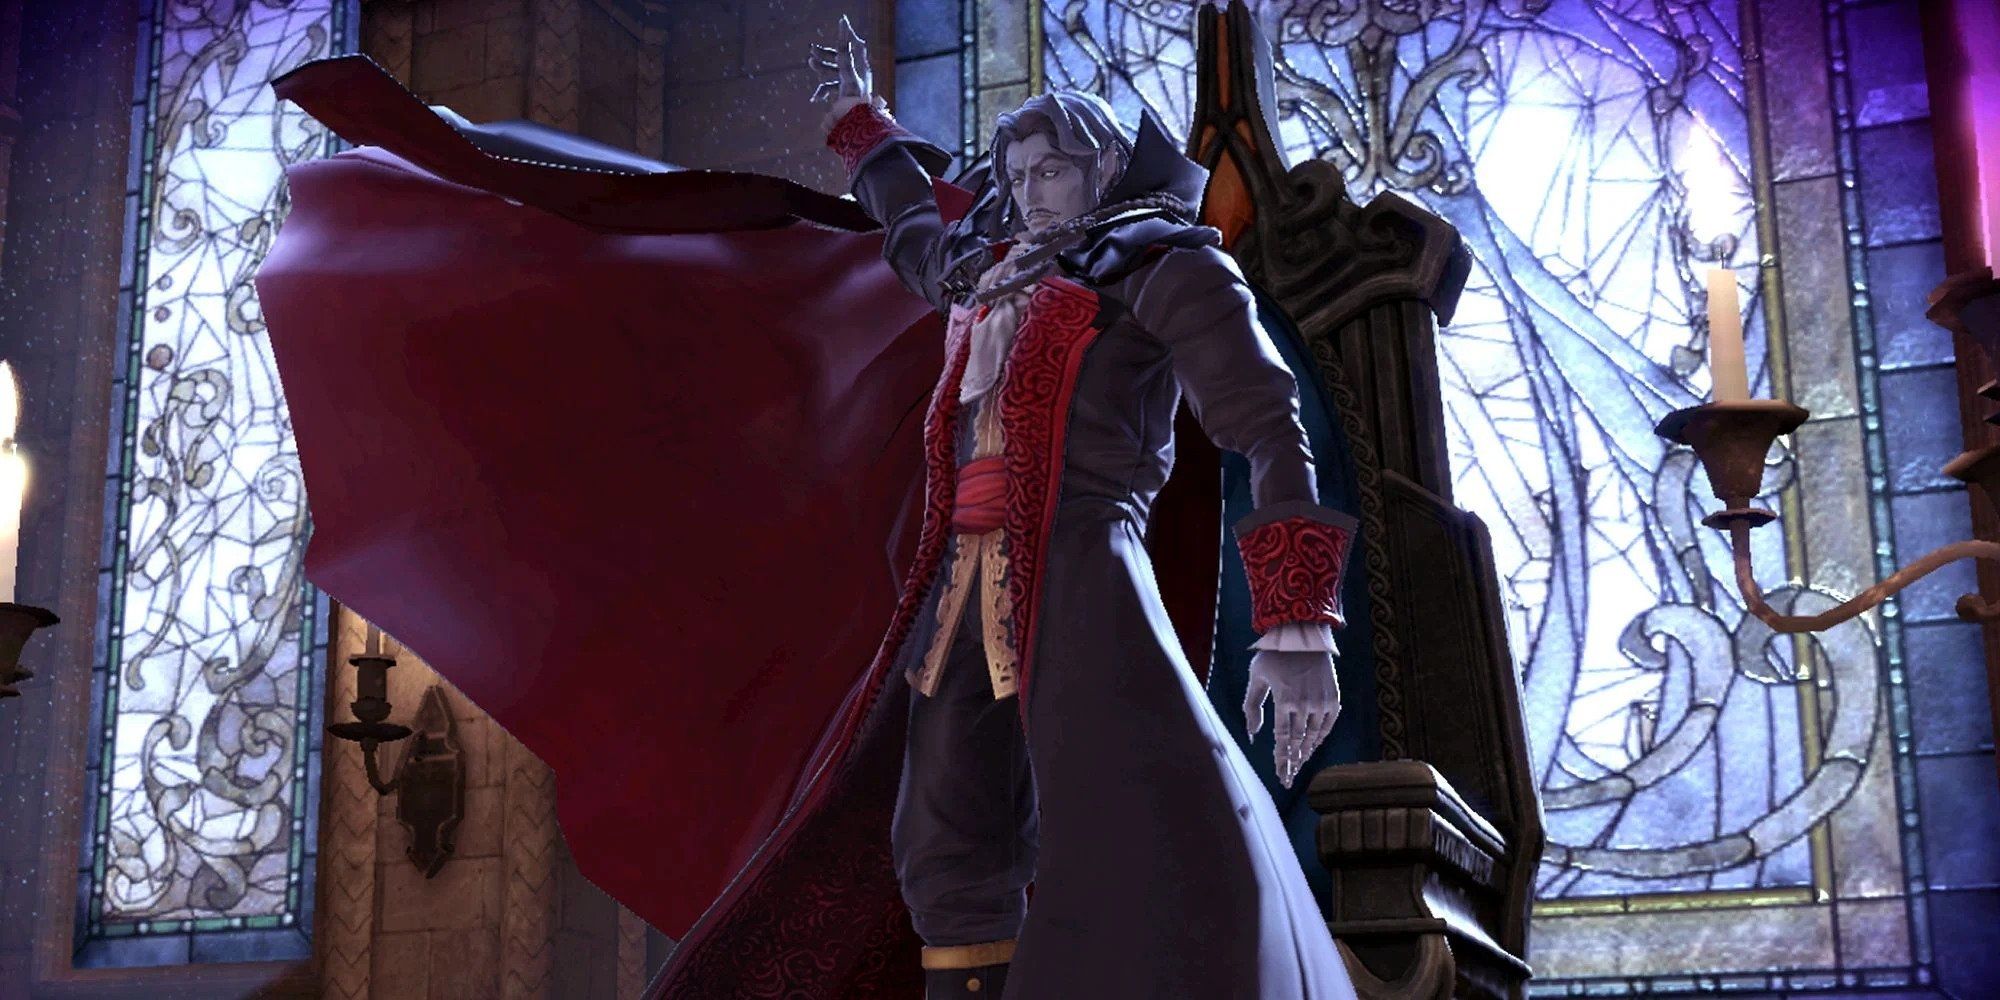 Image depicting Dracula from the Castlevania Franchise